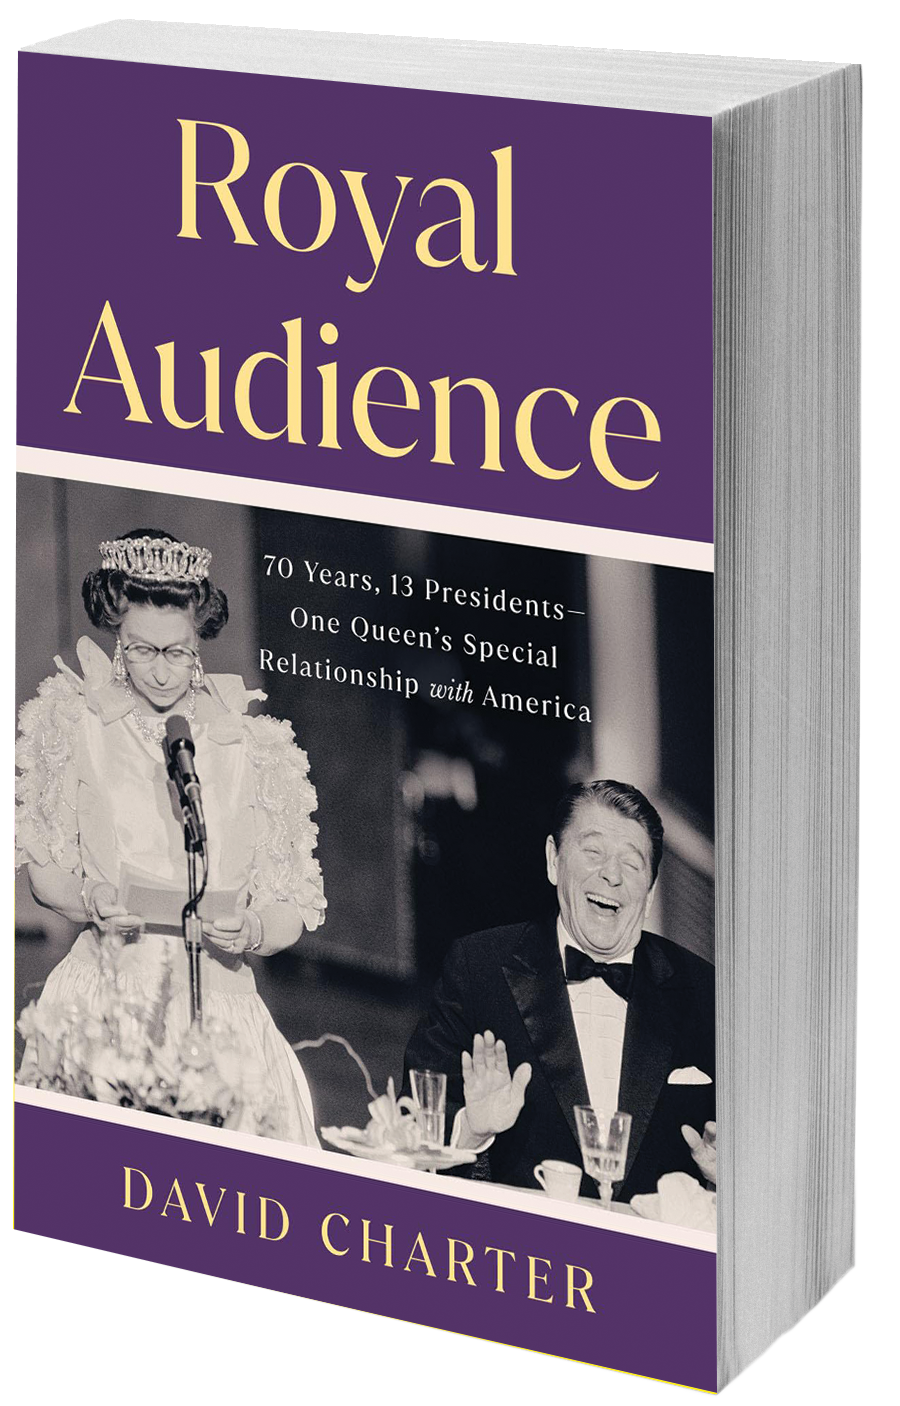 book cover photo of Queen Elizabeth speaking and Ronald Reagan laughing